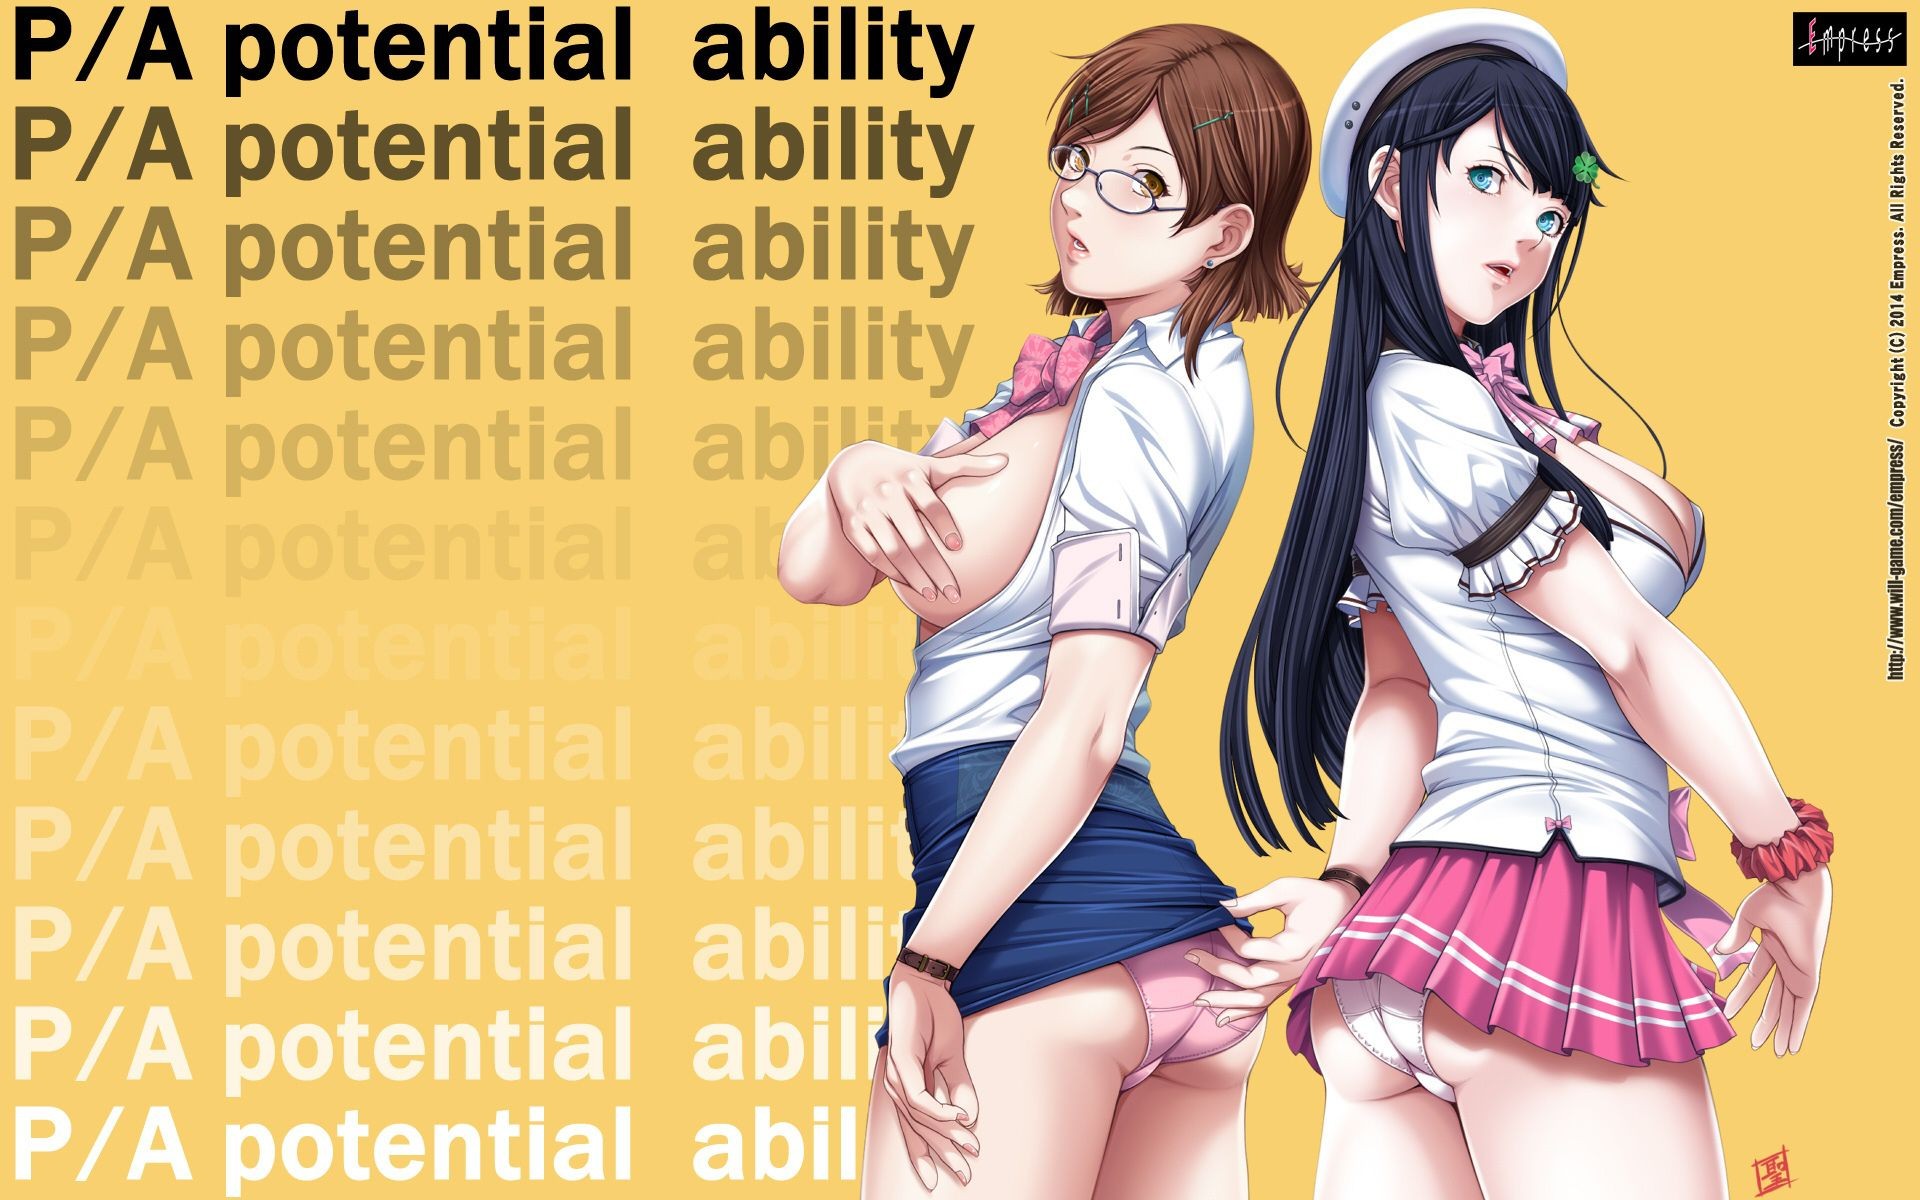 Best Blow Job P/A-Potential Ability To [under Age 18 Prohibited Eroge HCG] Wallpapers, Images Student